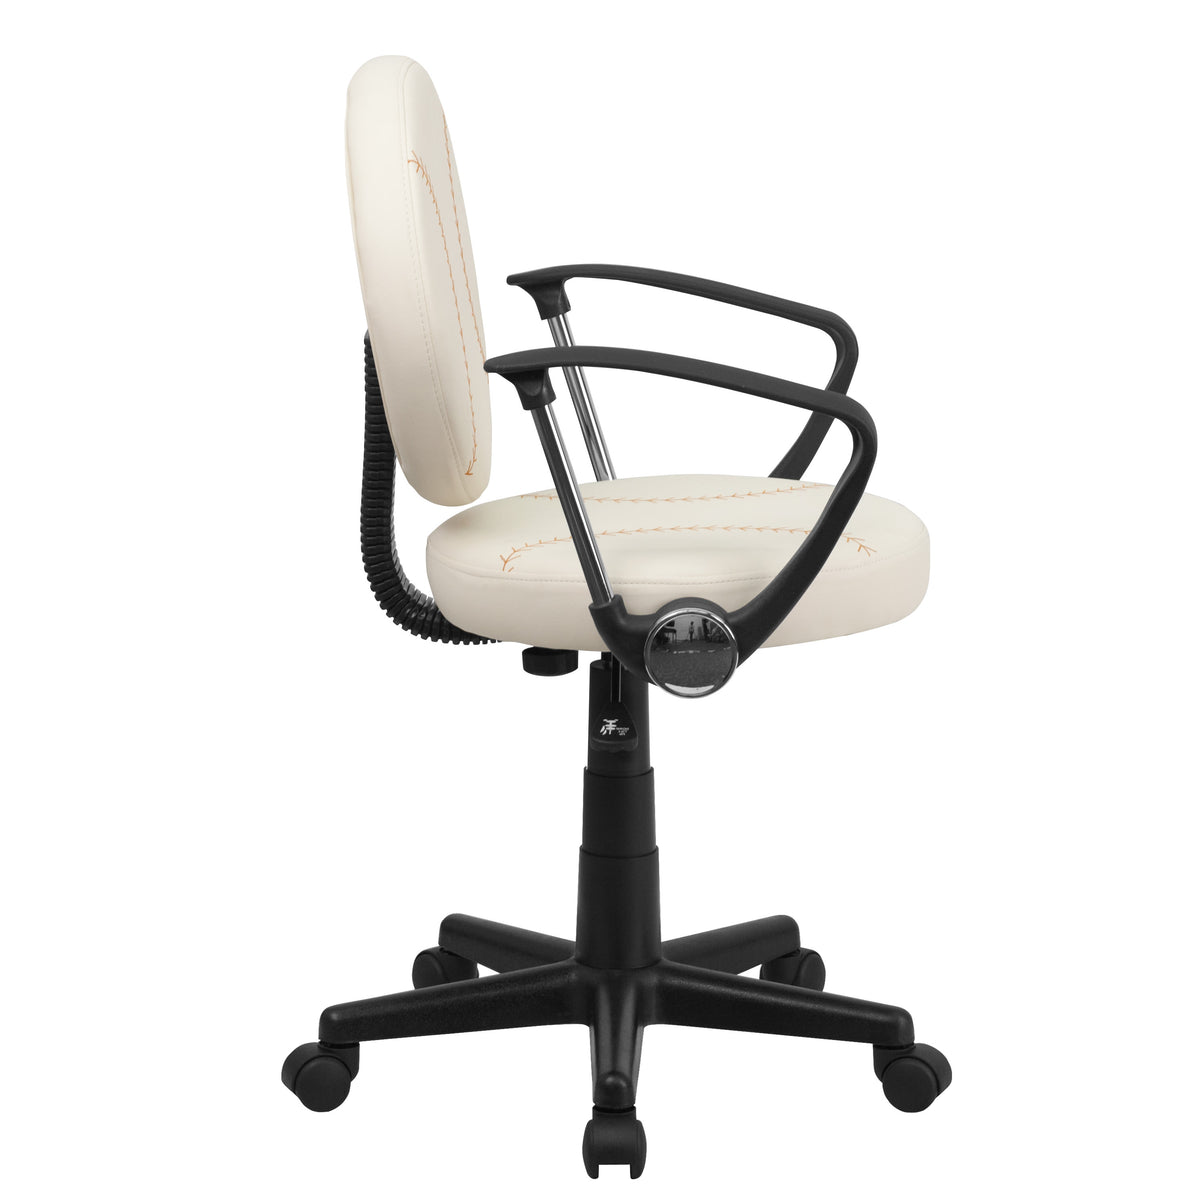 Brown and Cream |#| Baseball Vinyl Upholstered Swivel Task Chair with Arms and Adjustable Height